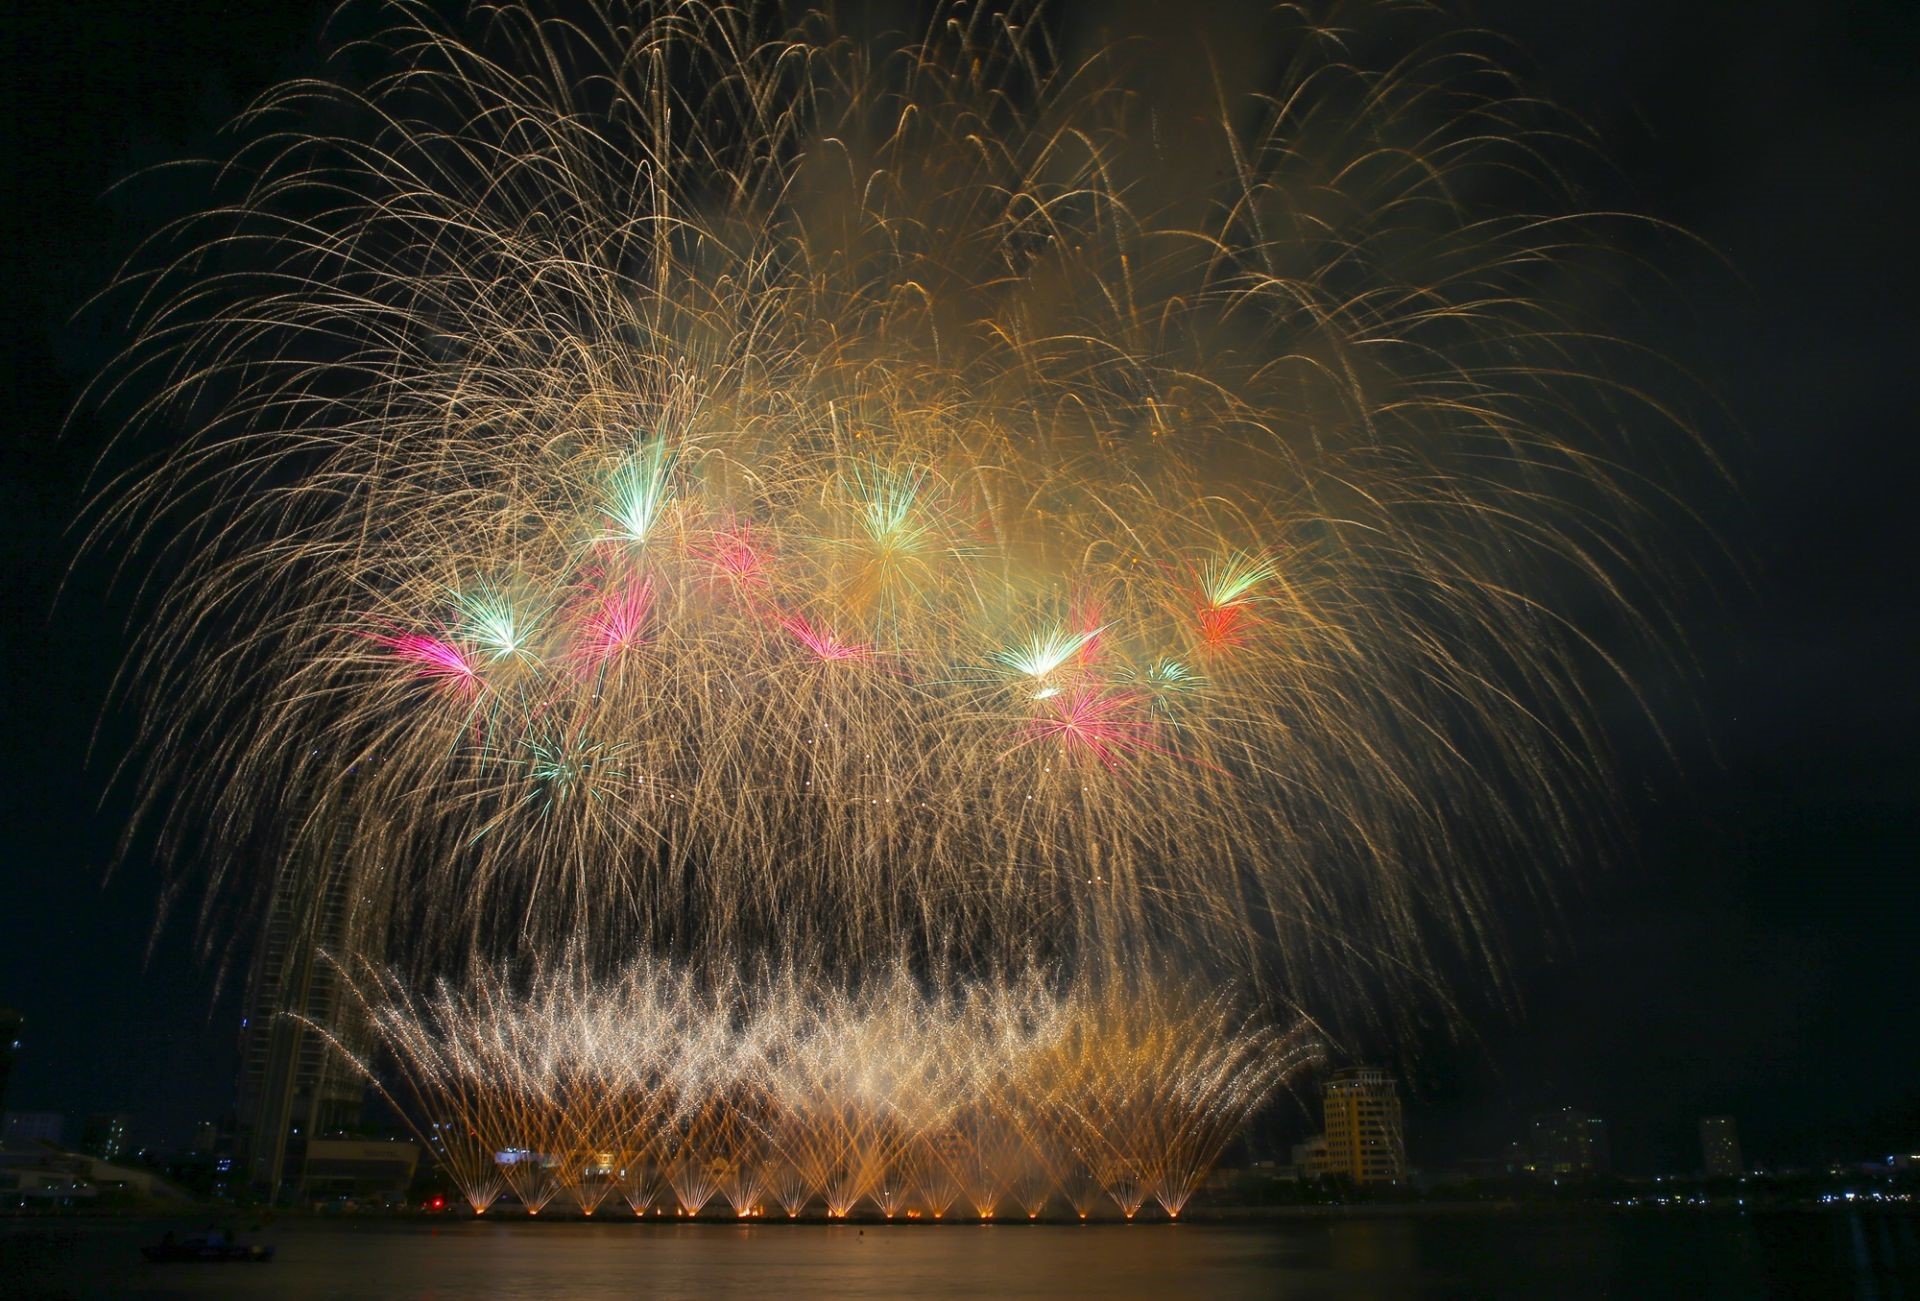 The appearance of the defending champion 2019 - Finnish Fireworks Team Joho Pyro Professional Fireworks made the heat of the opening night of DIFF 2023.